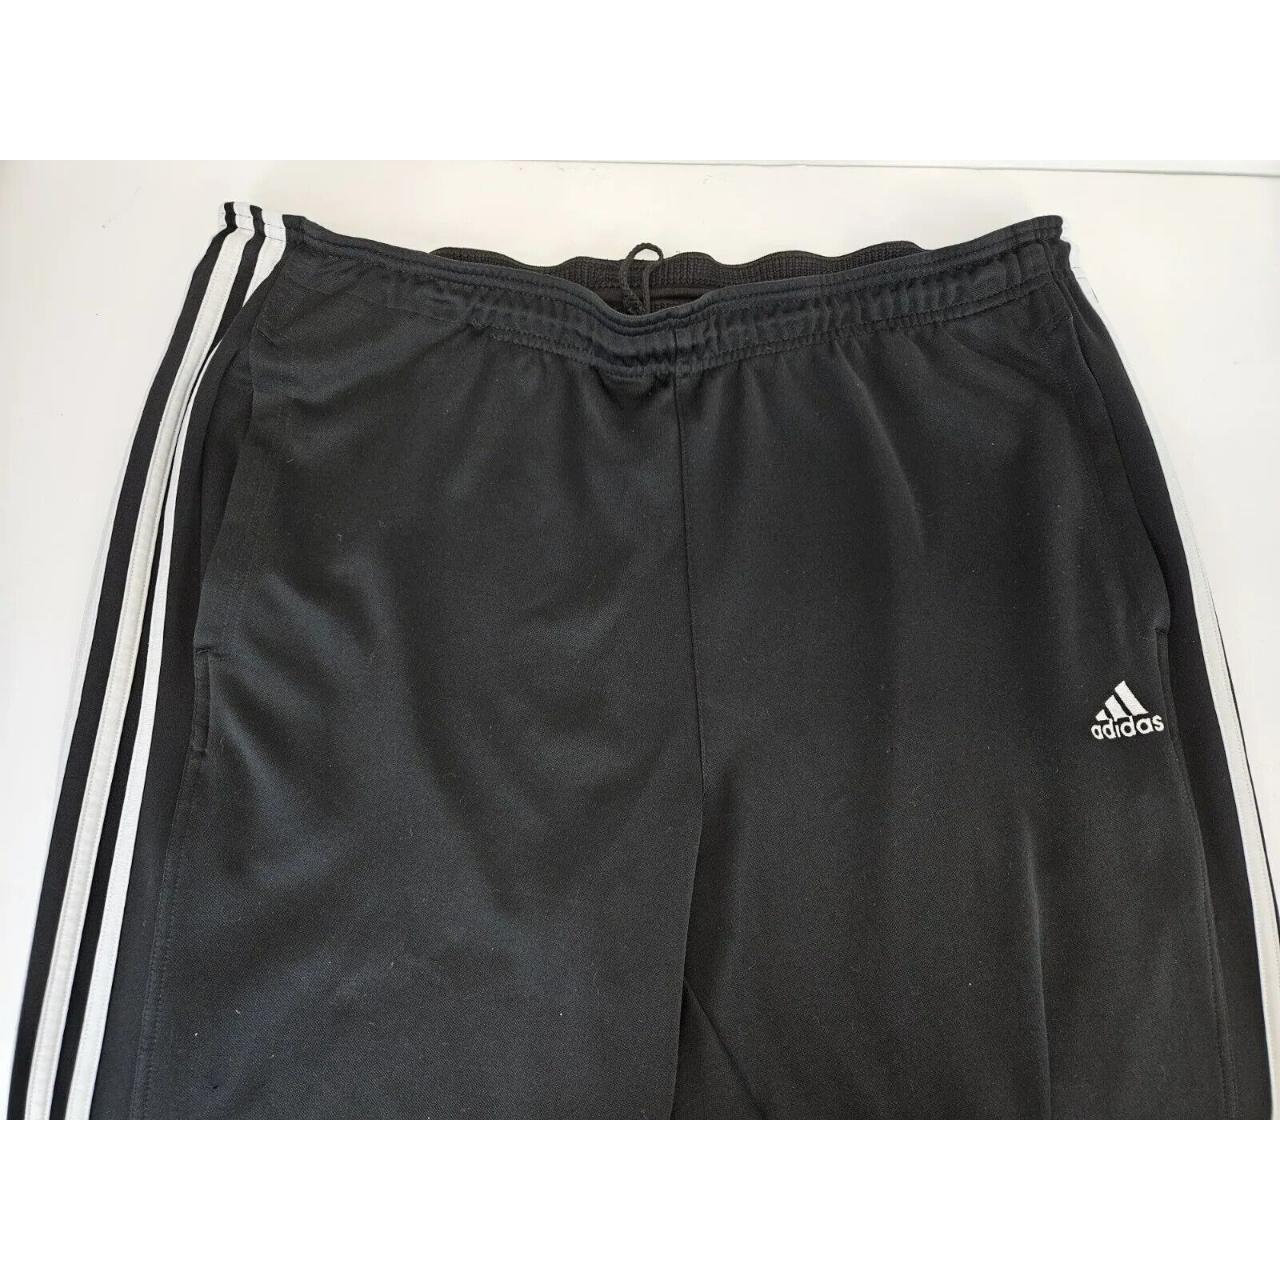 Upgrade your activewear collection with these Adidas... - Depop